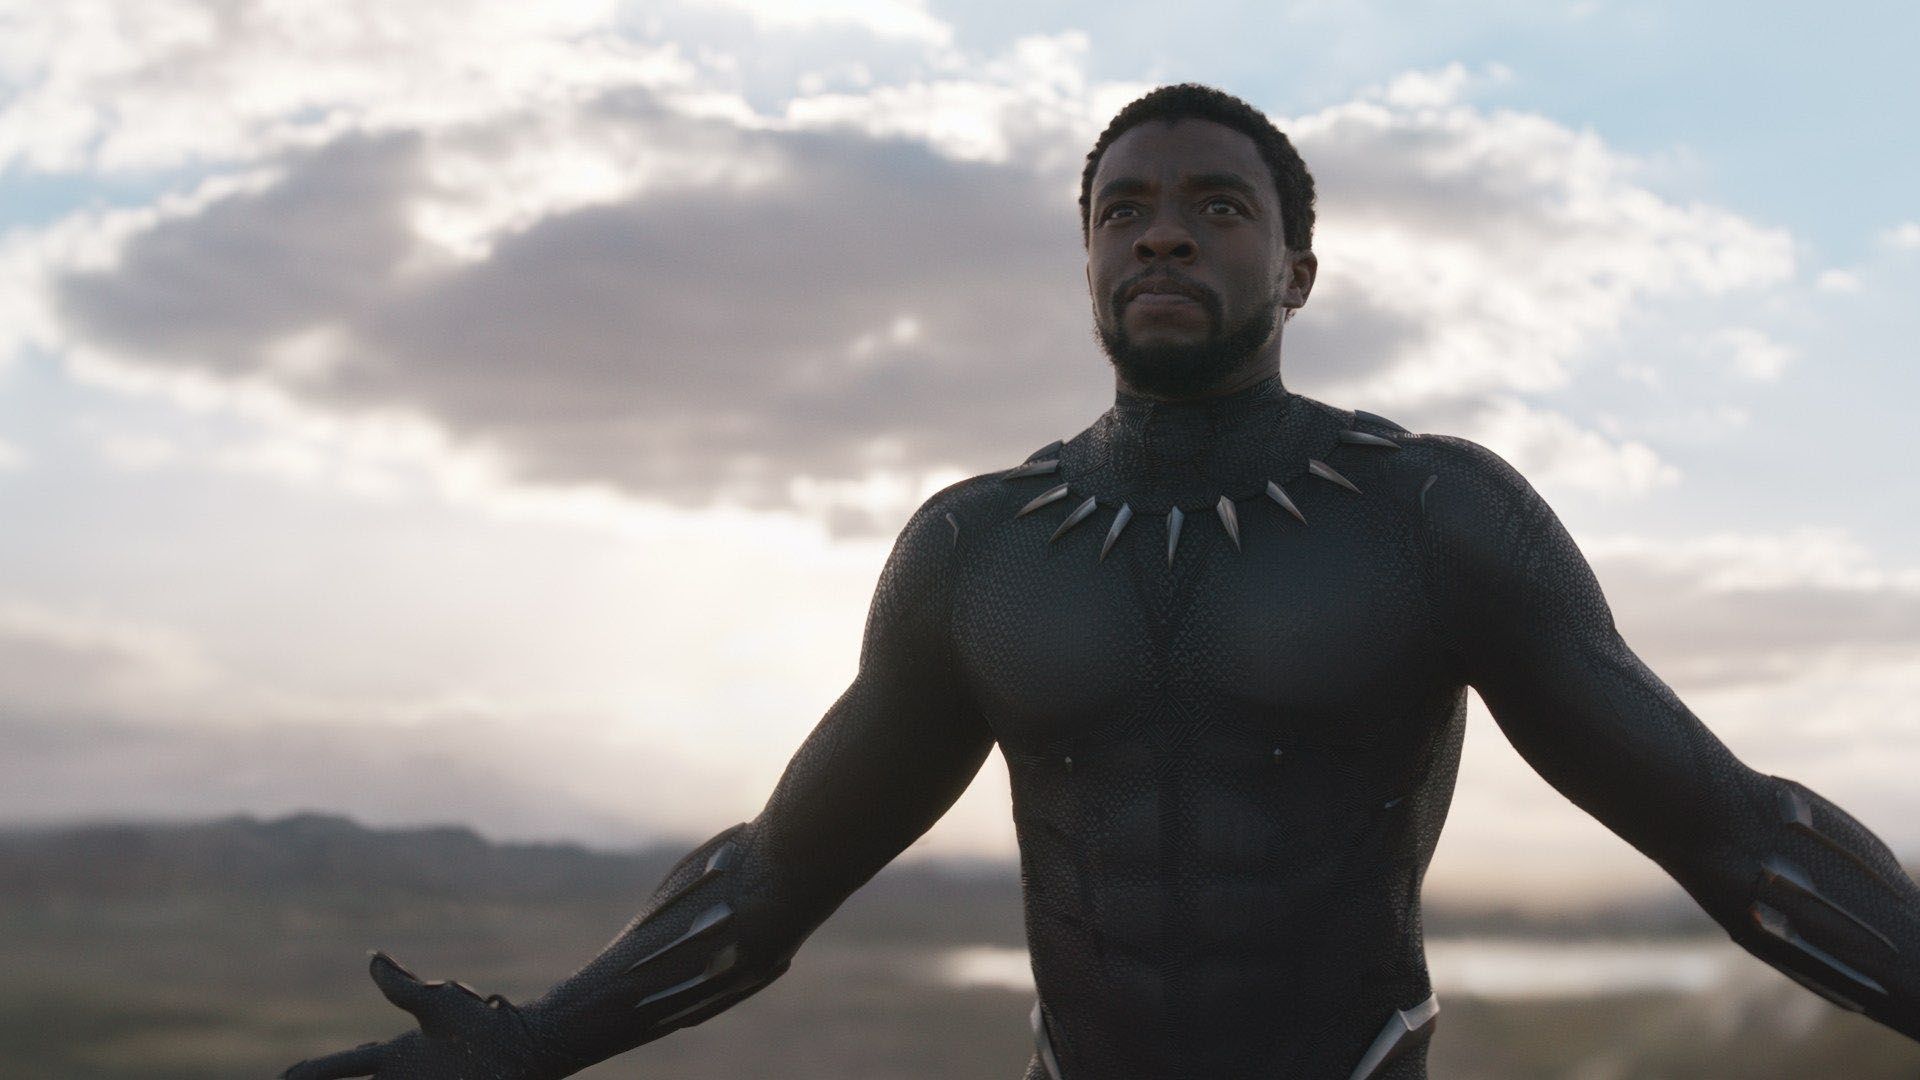 Black Panther star Chadwick Boseman dies at 43 from cancer